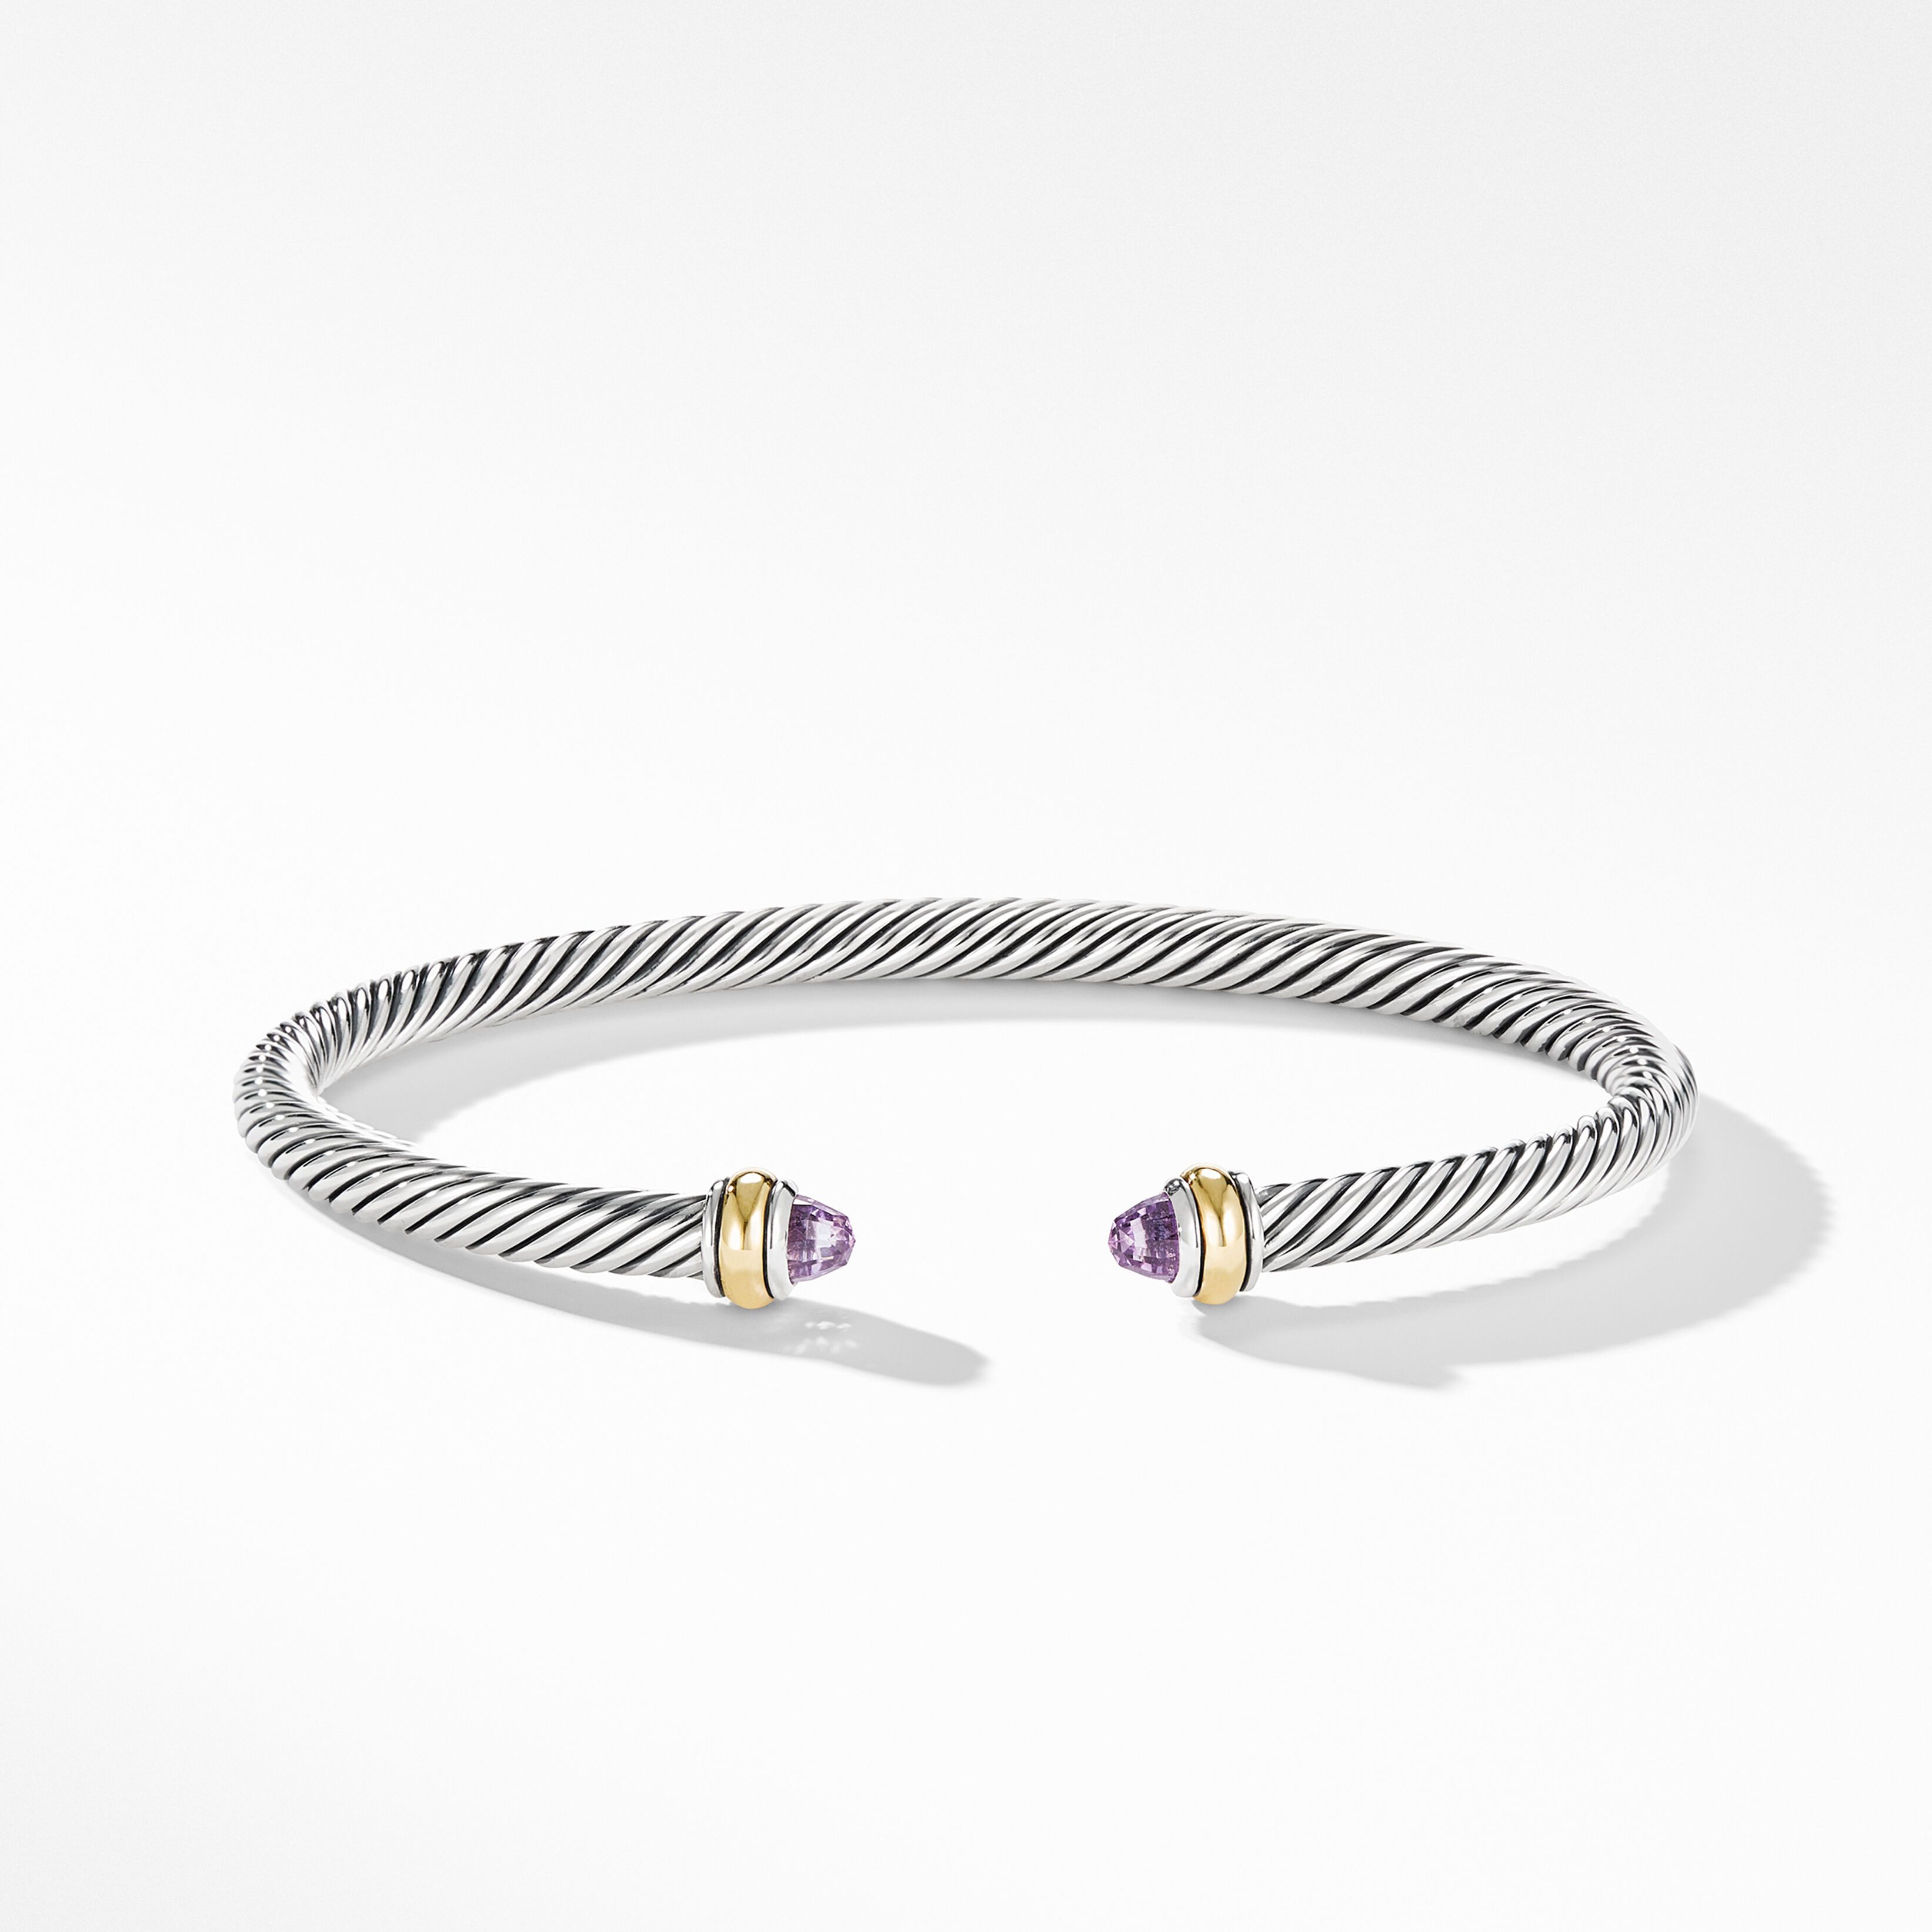 Cable Classics Bracelet in Sterling Silver with Amethyst and 18K Yellow Gold | David Yurman